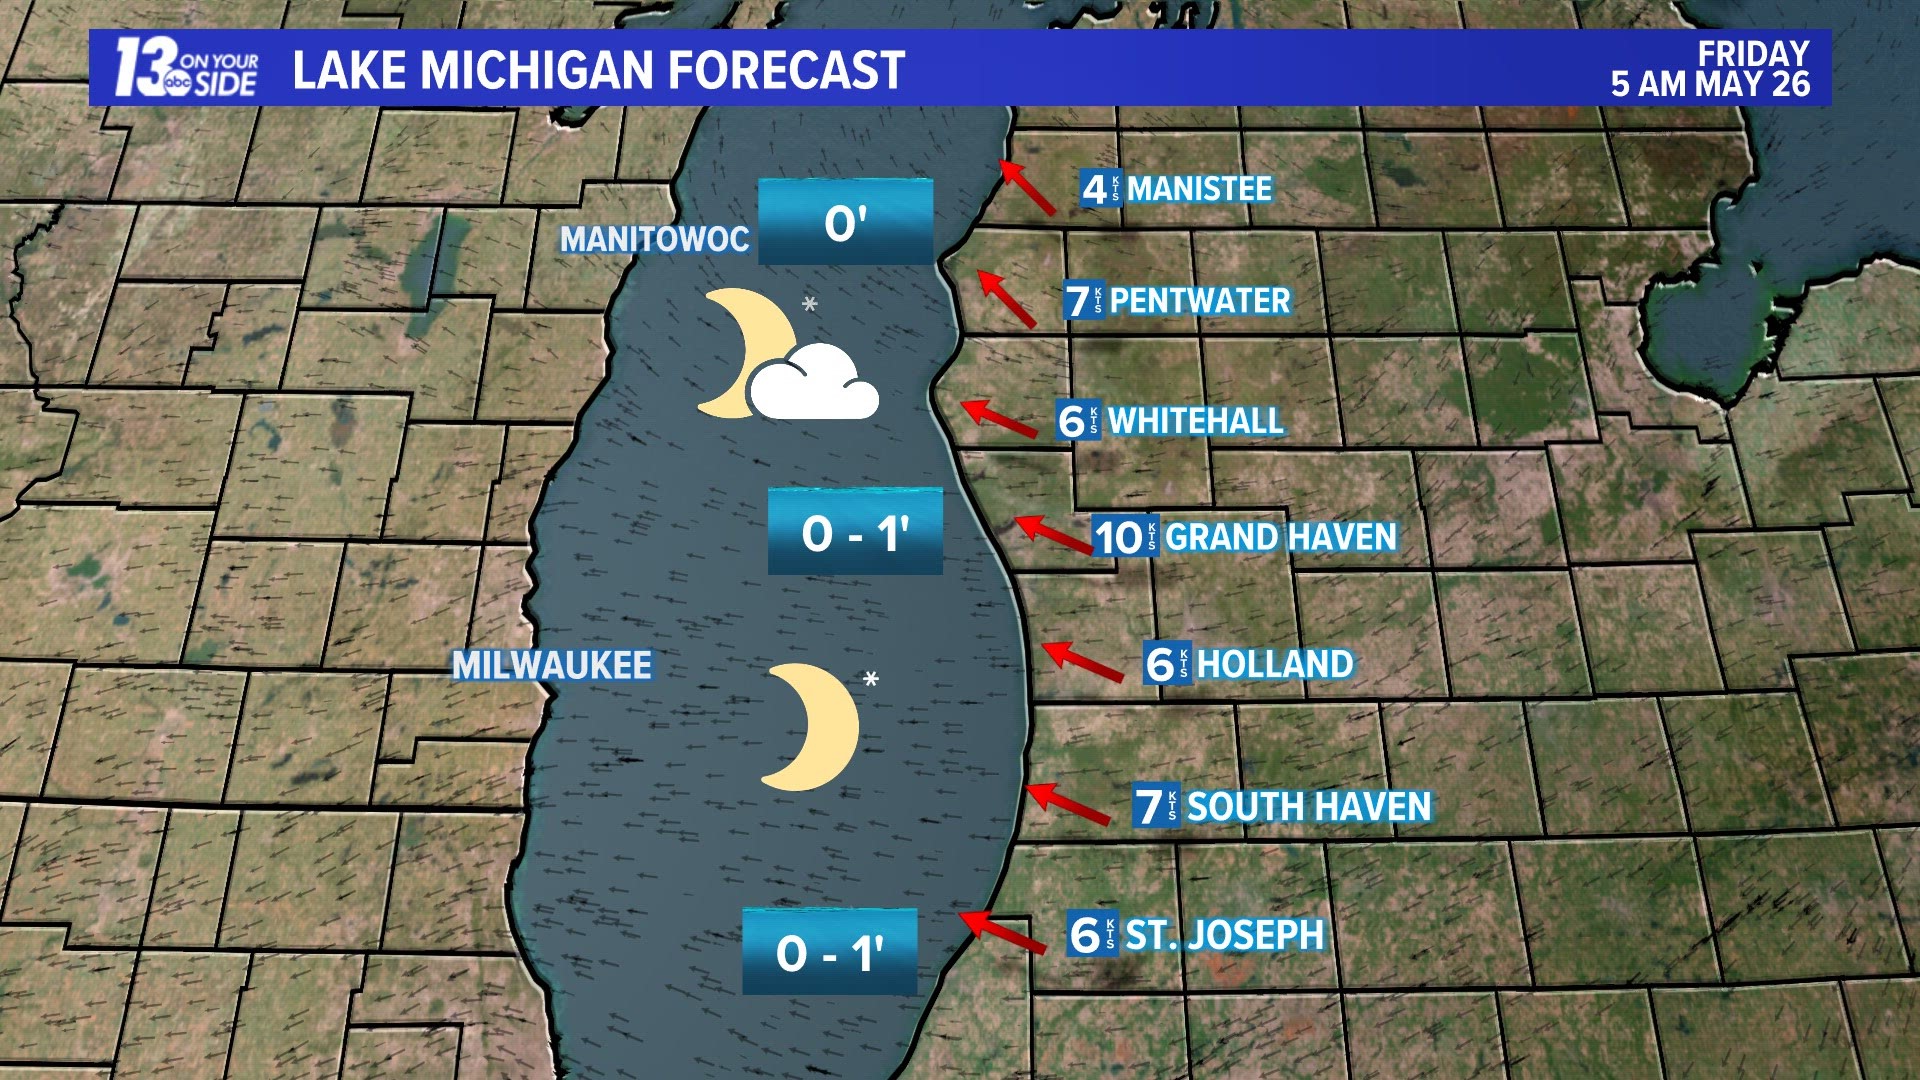 Lake Michigan forecast conditions are available during the warm season on our web site.